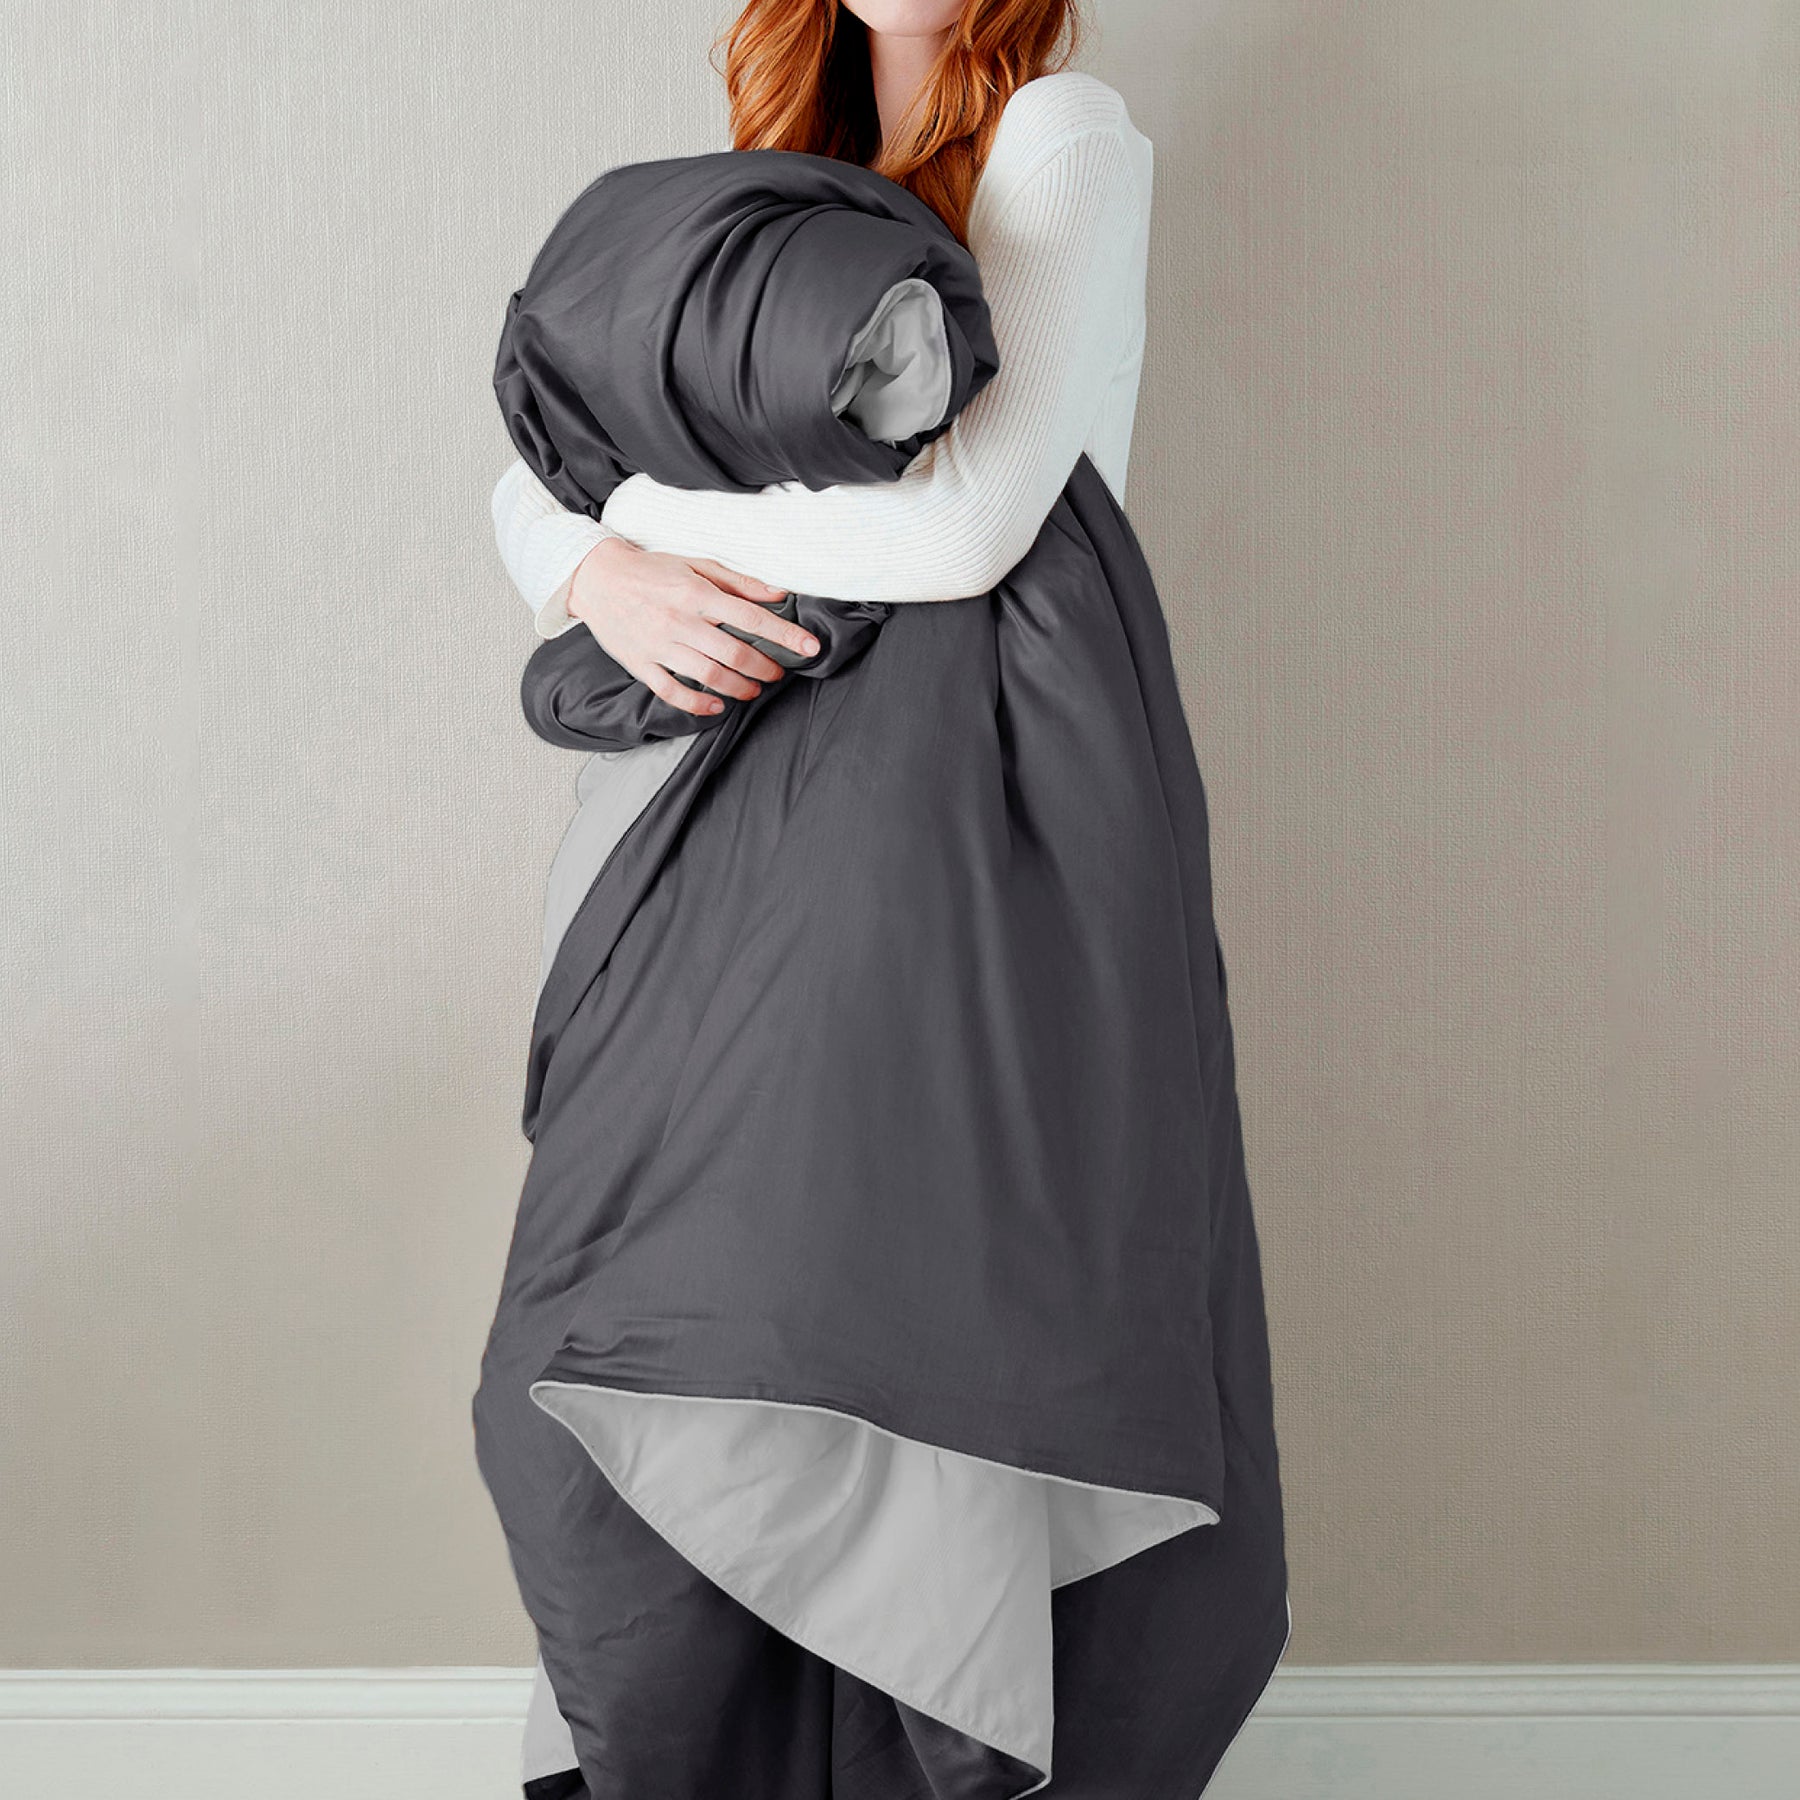 Image of a woman standing and holding the Shadow/Dove Gray Soft Touch Duvet Cover against her